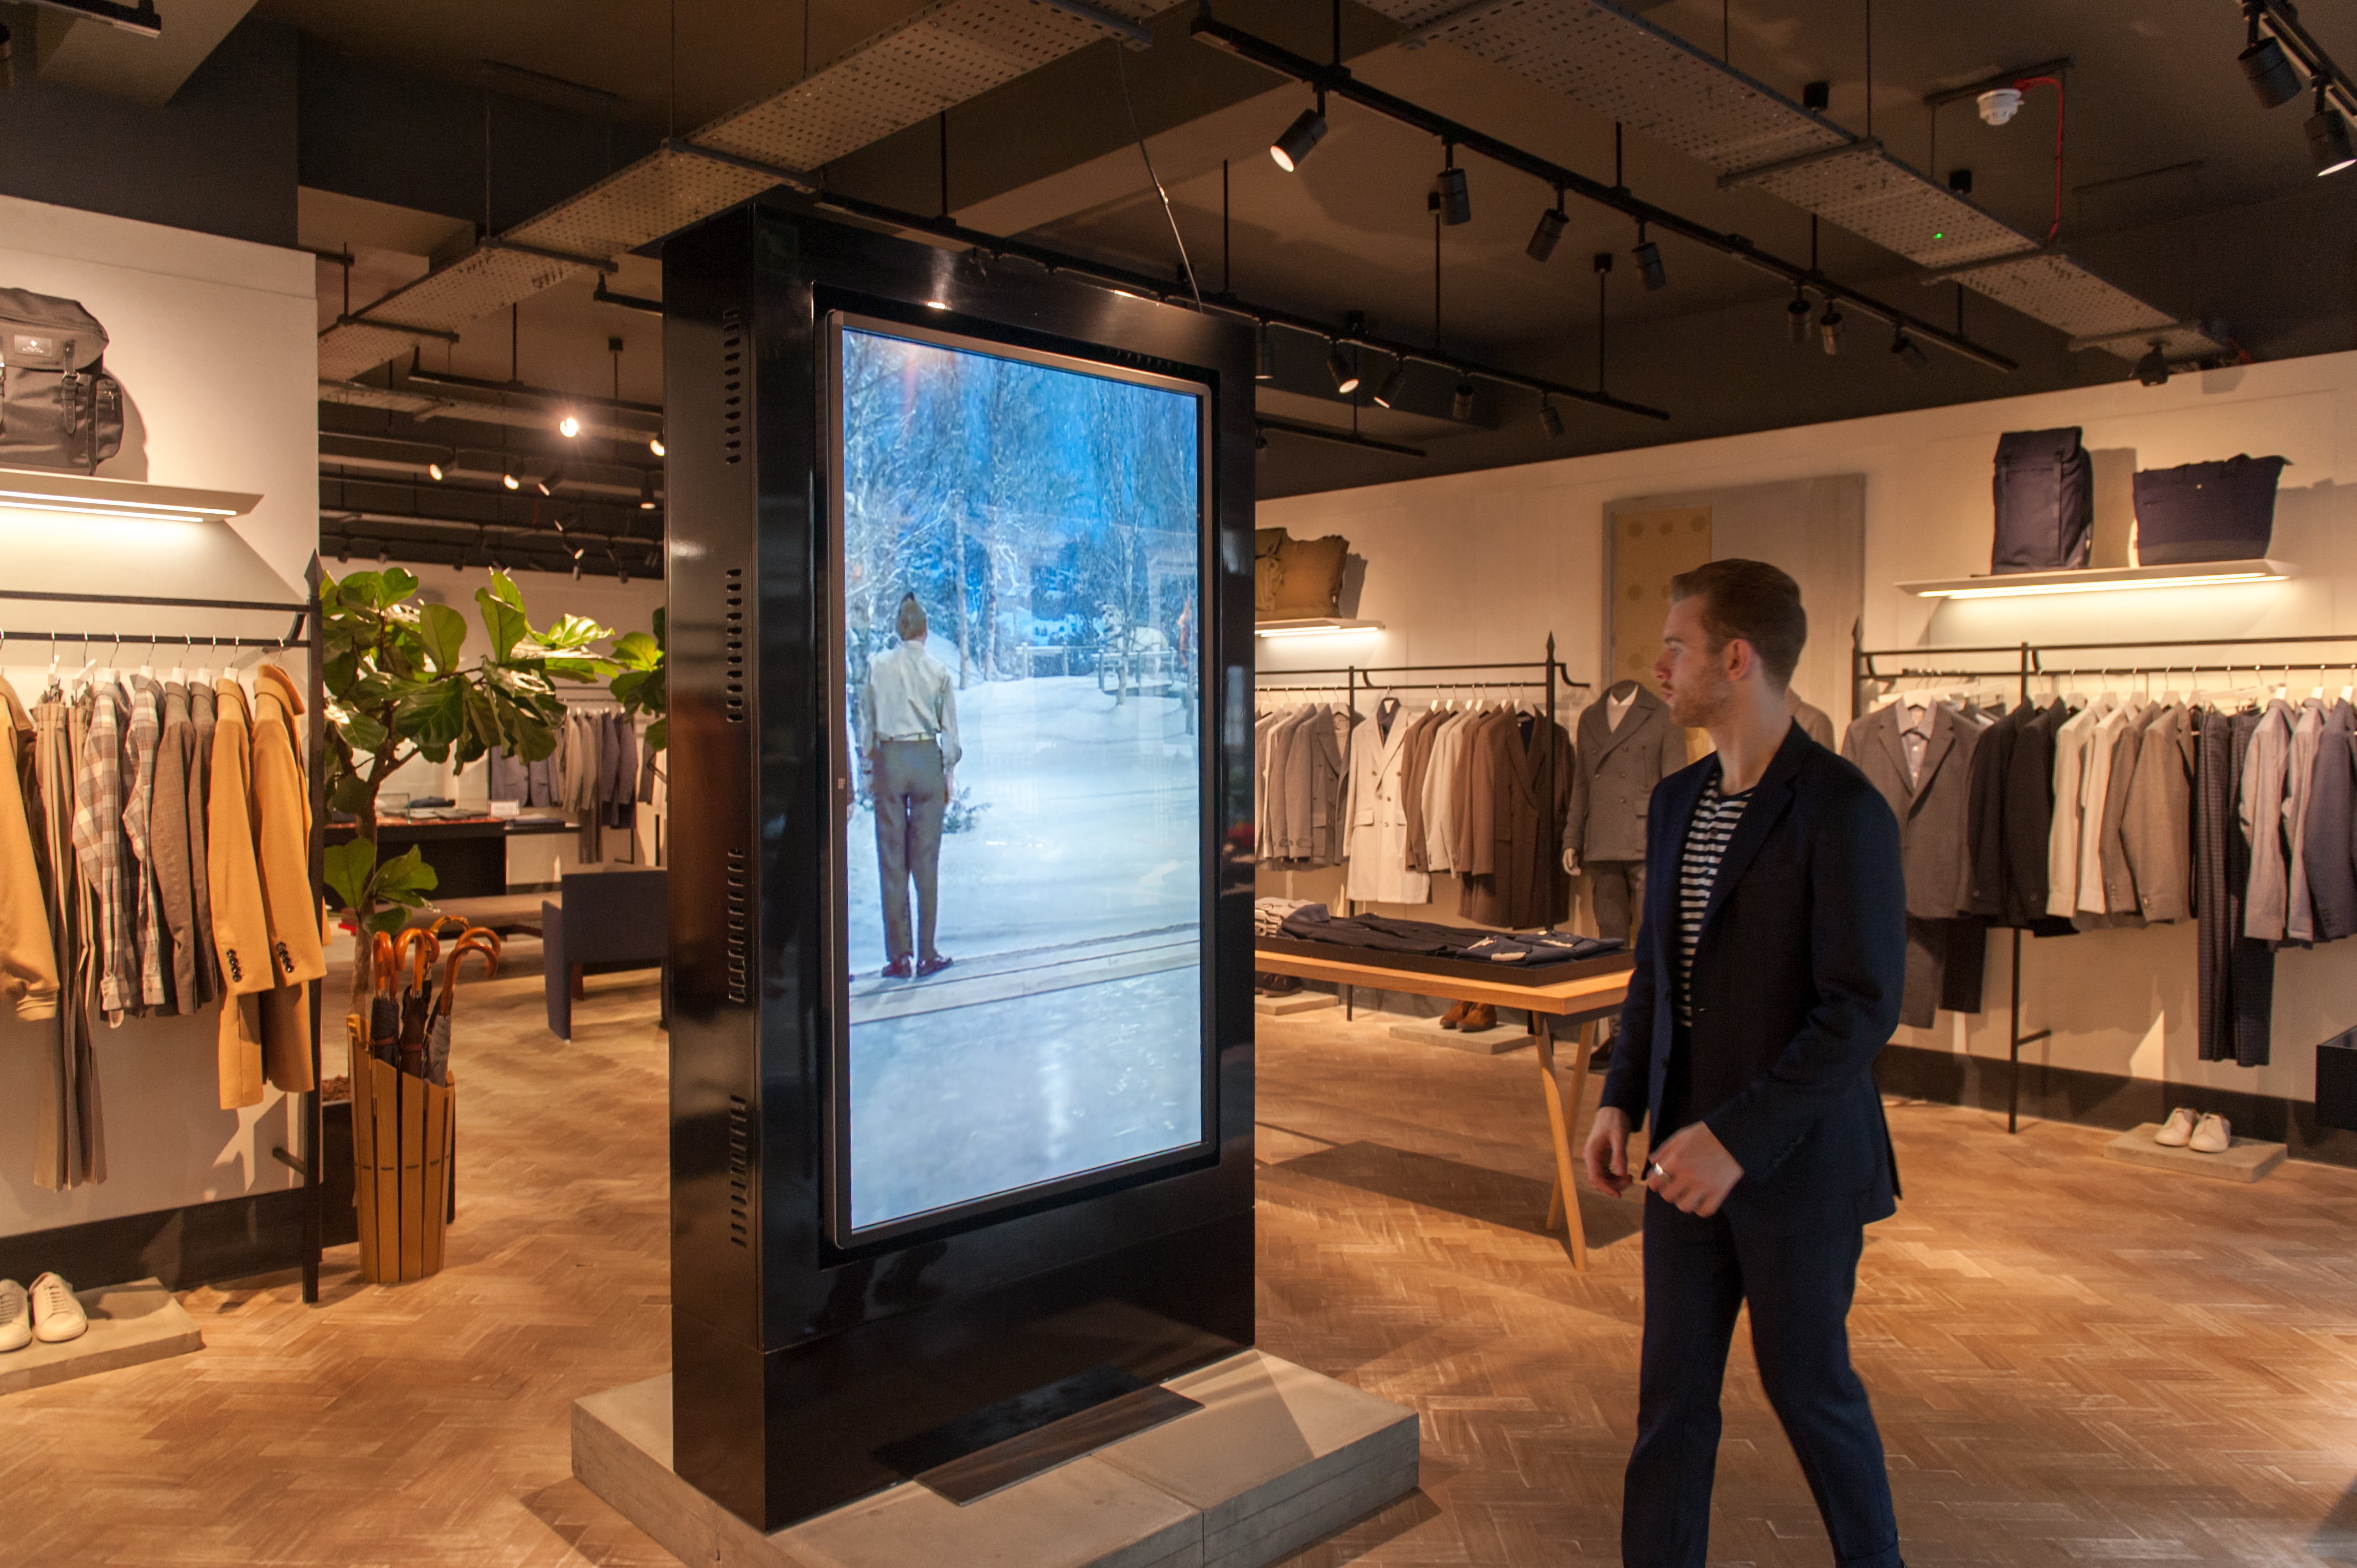 Retailer bridges the digital and physical gap with touch screen deployment in stores – with instant sales growth